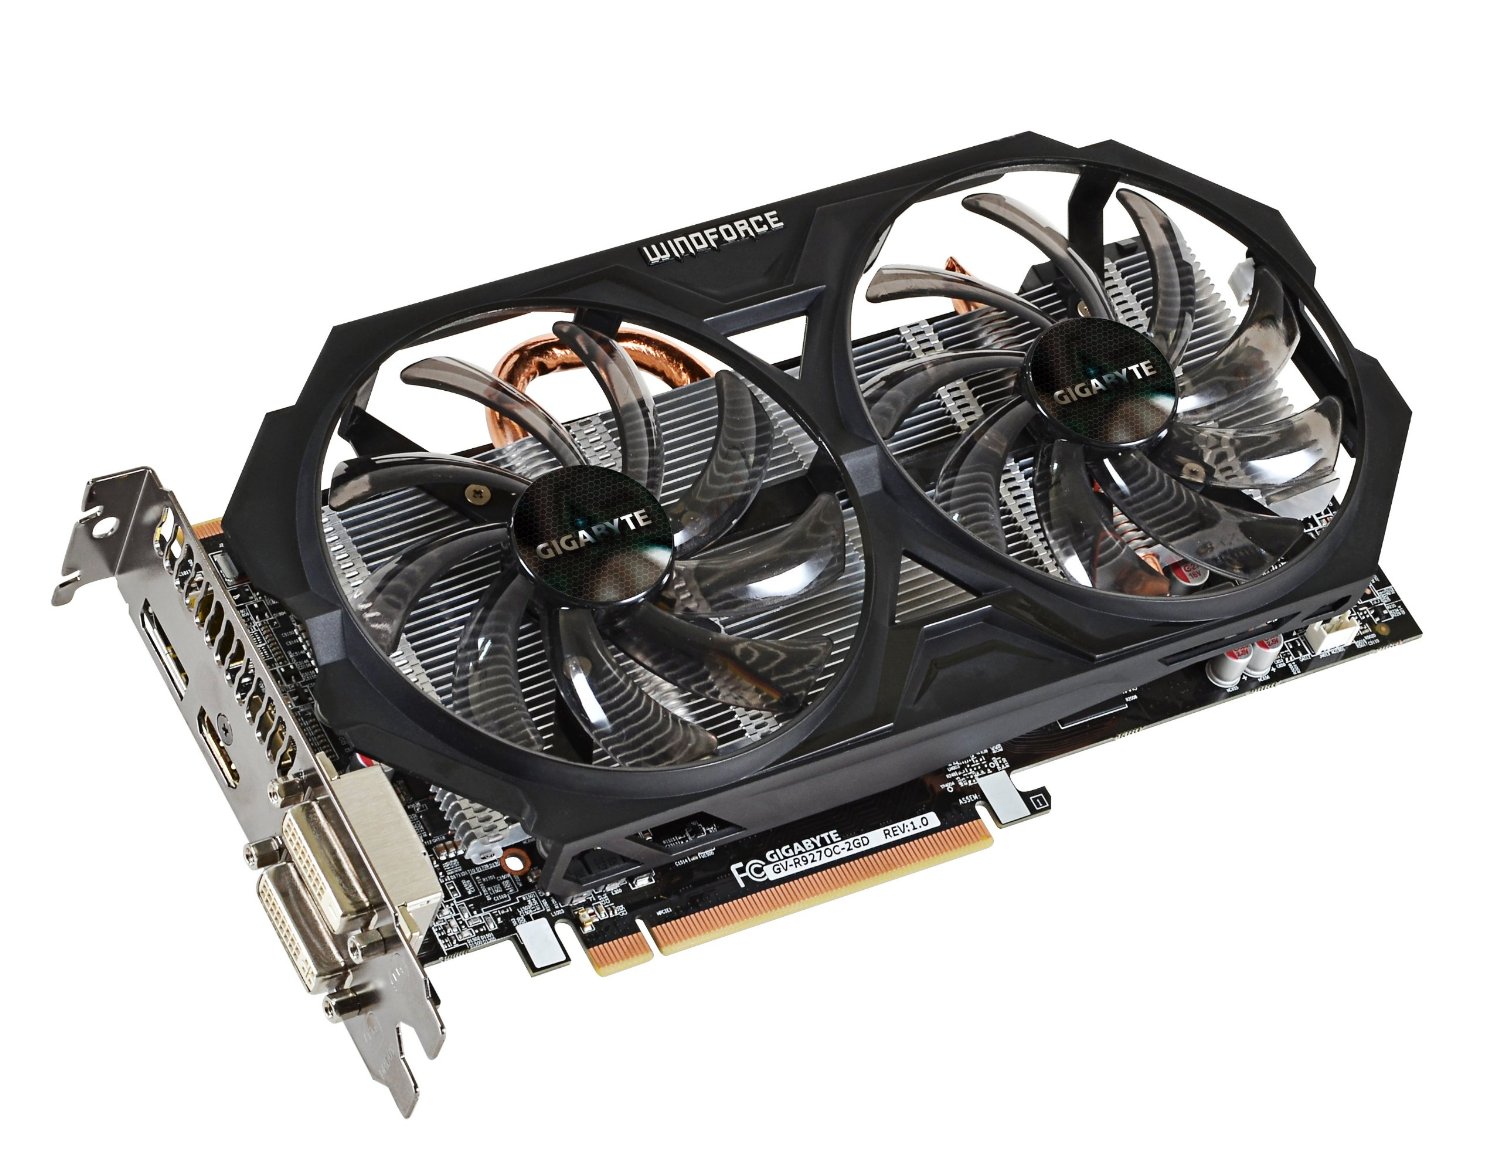 Understanding The GPU Requirements For Gaming